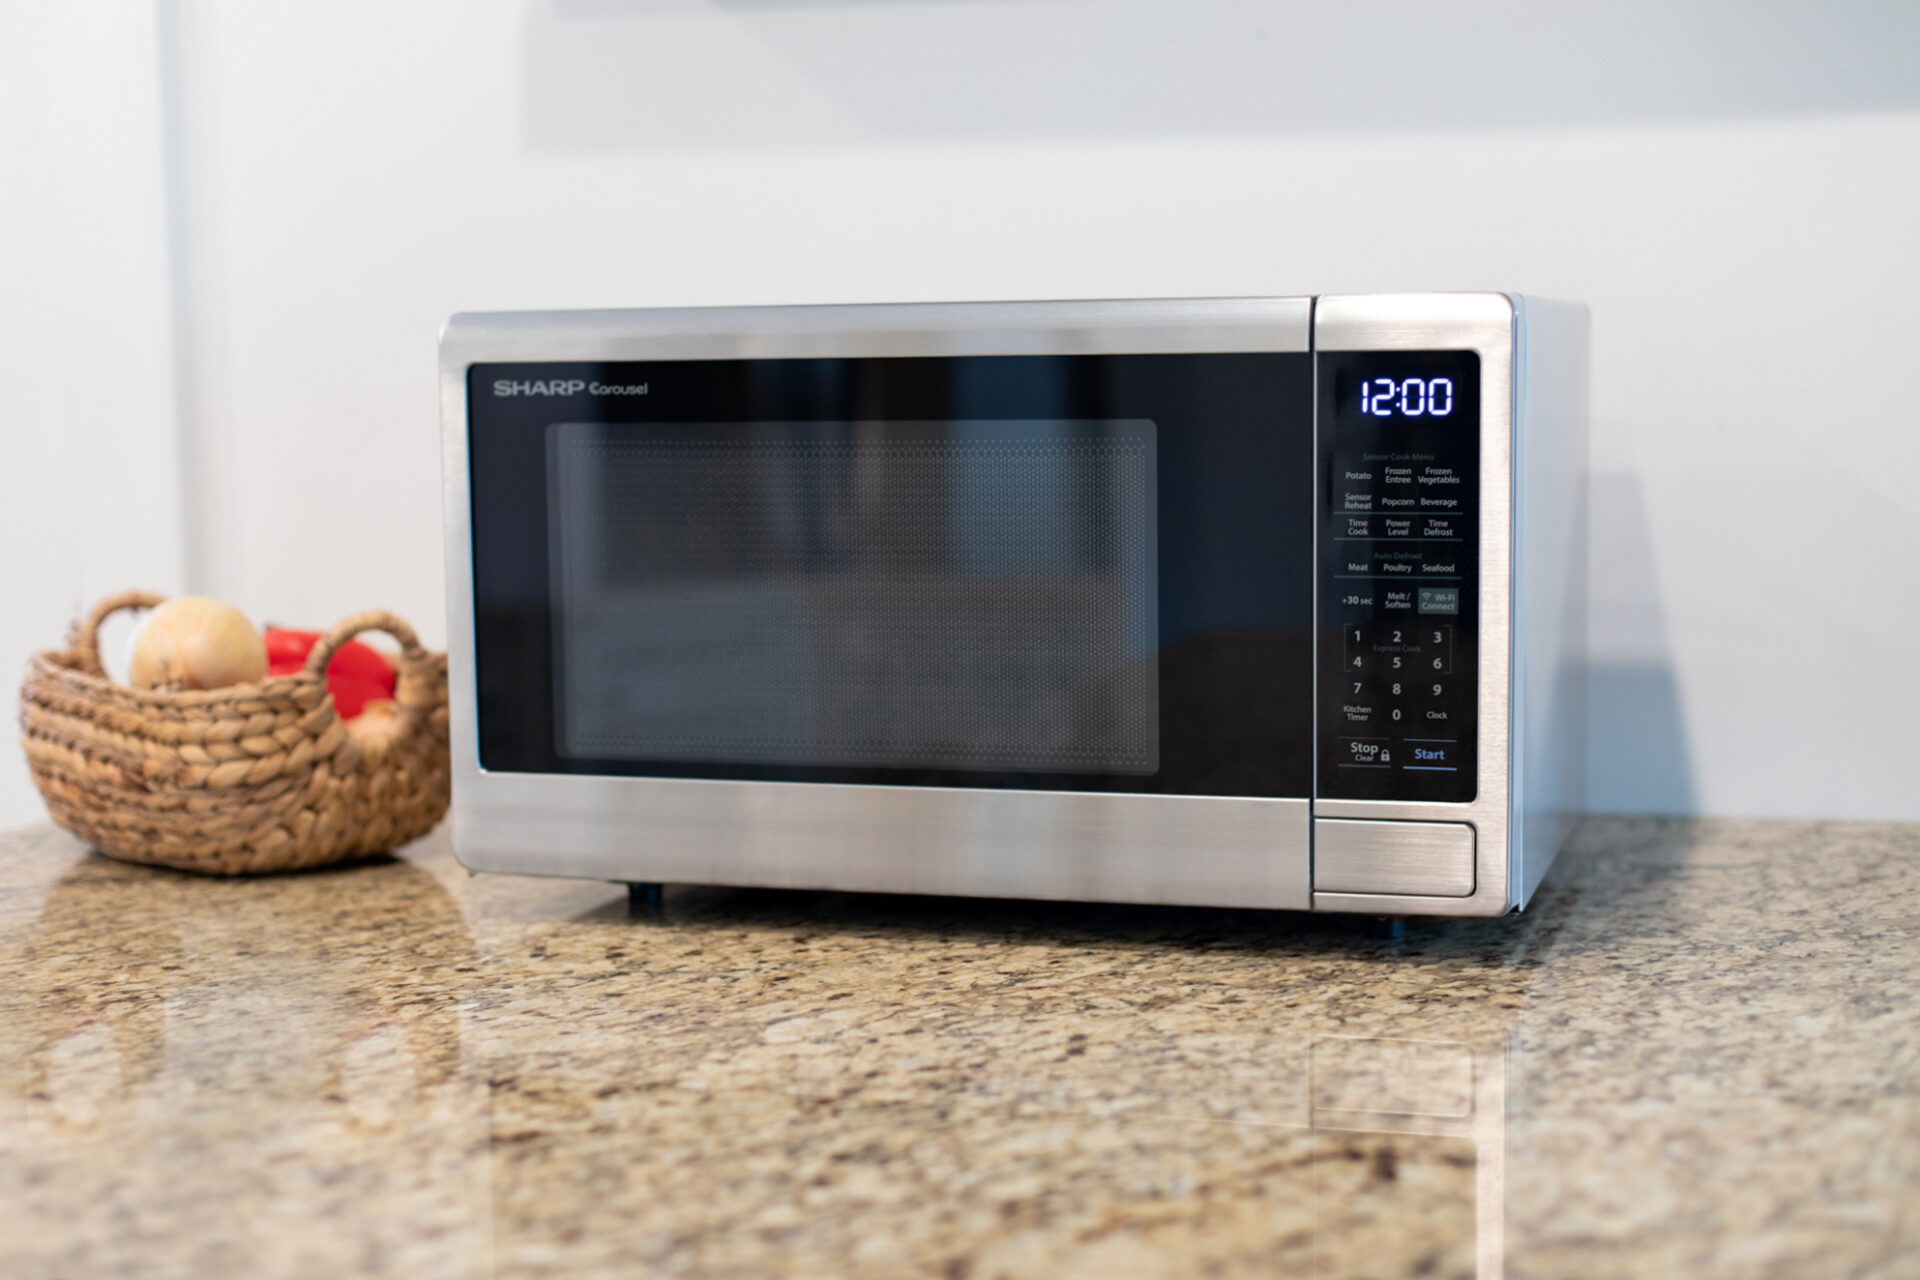 Simply Perfect 1.1 Cu. Ft. Stainless Steel Microwave Oven, Microwave Ovens, Furniture & Appliances